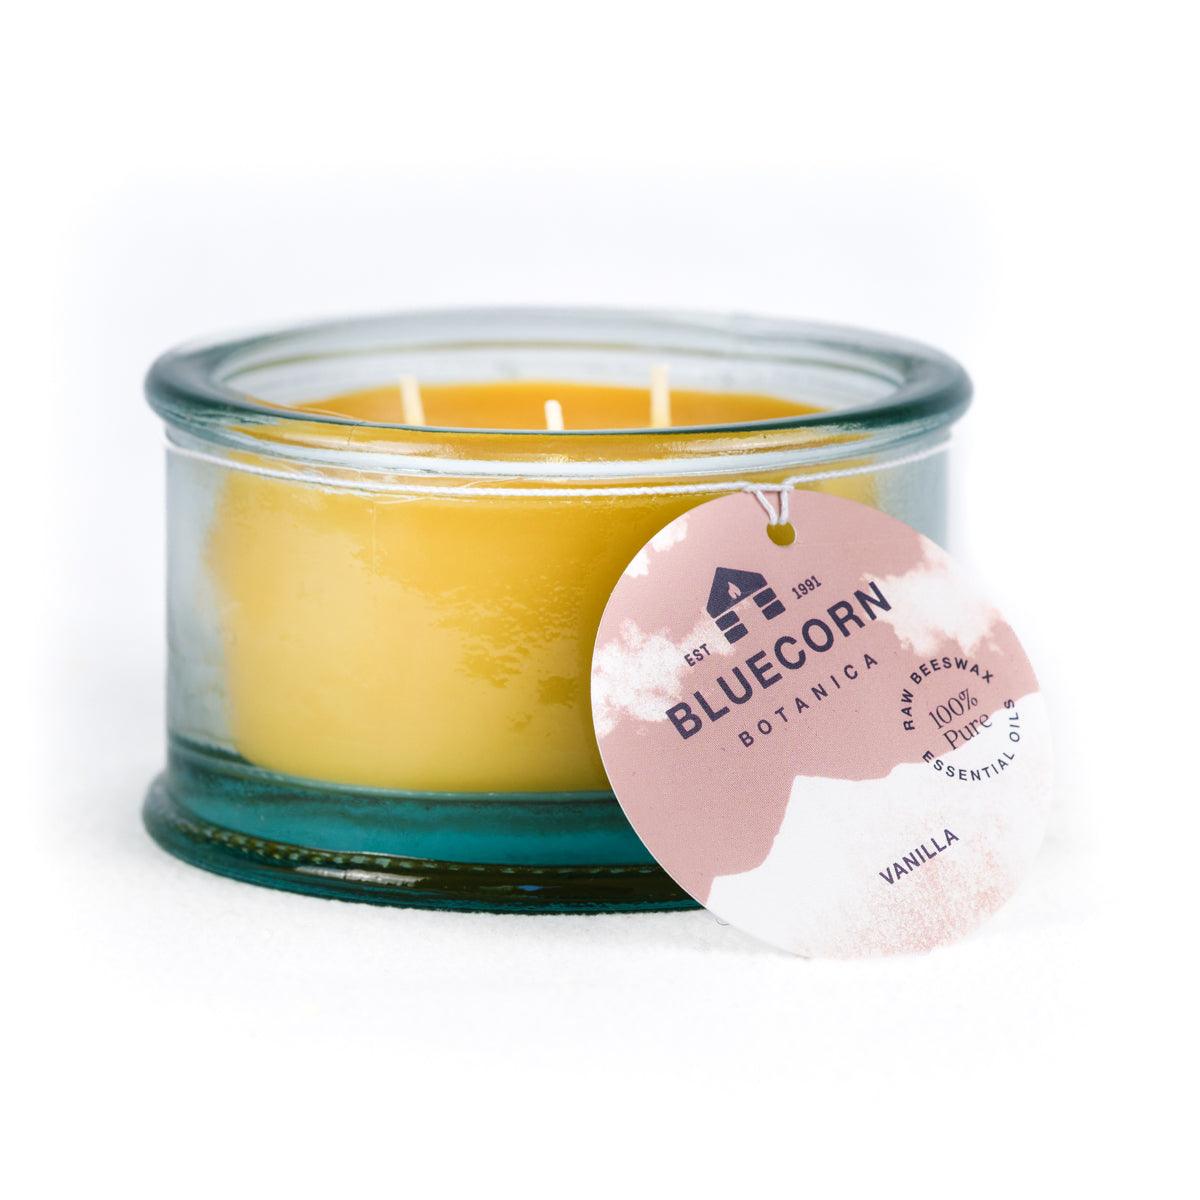 Botanica Beeswax Scented Candle - 3-Wick – Bluecorn Candles